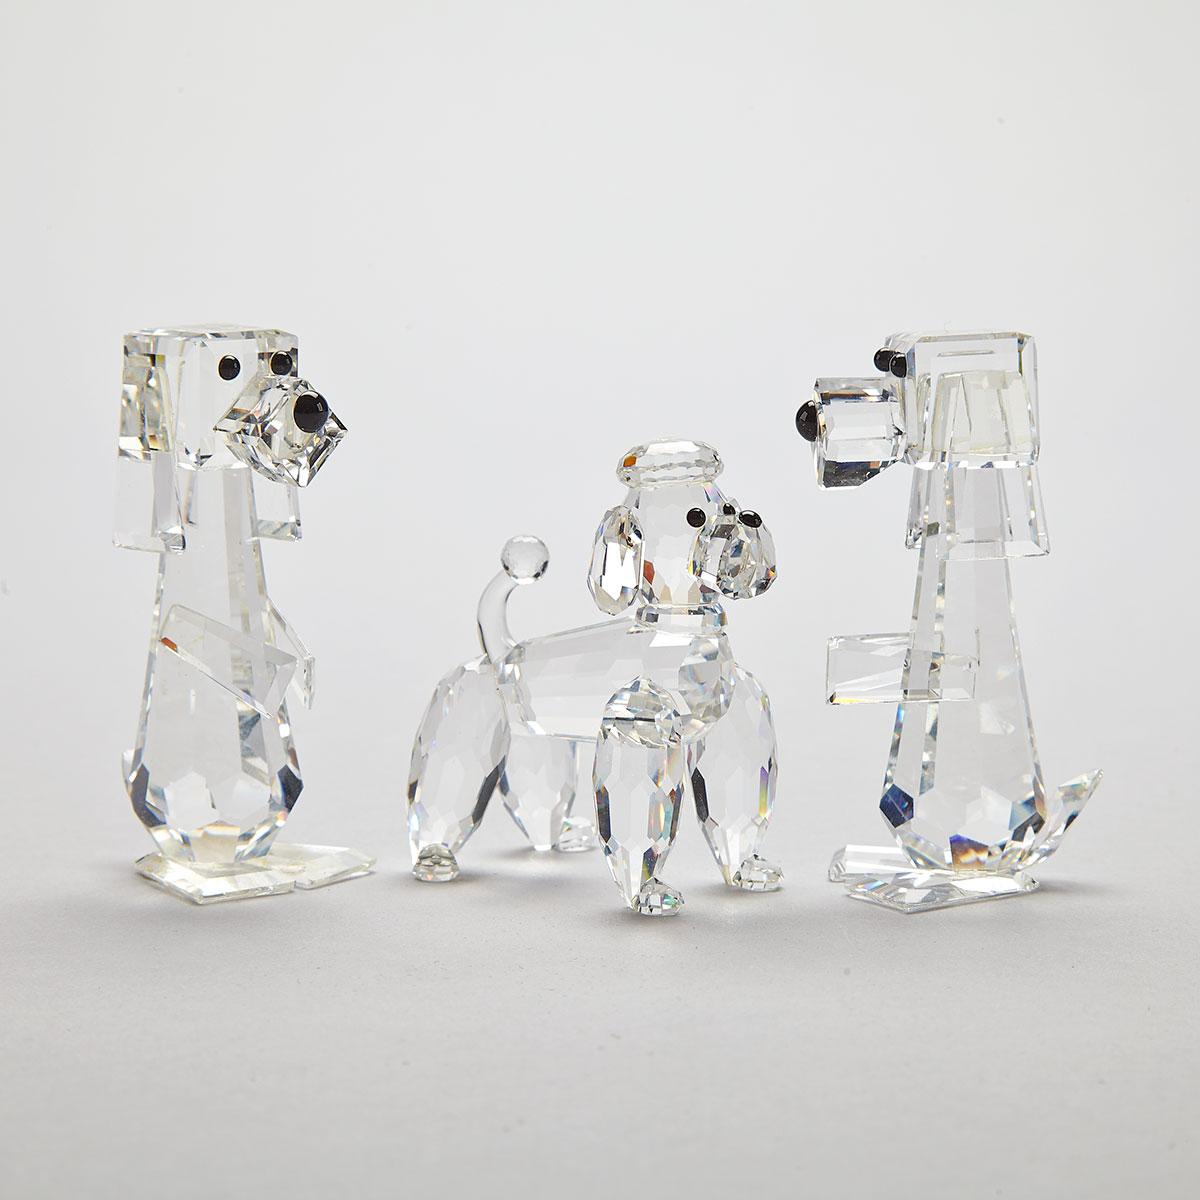 Ten Swarovski Crystal Dogs, late 20th/early 21st century